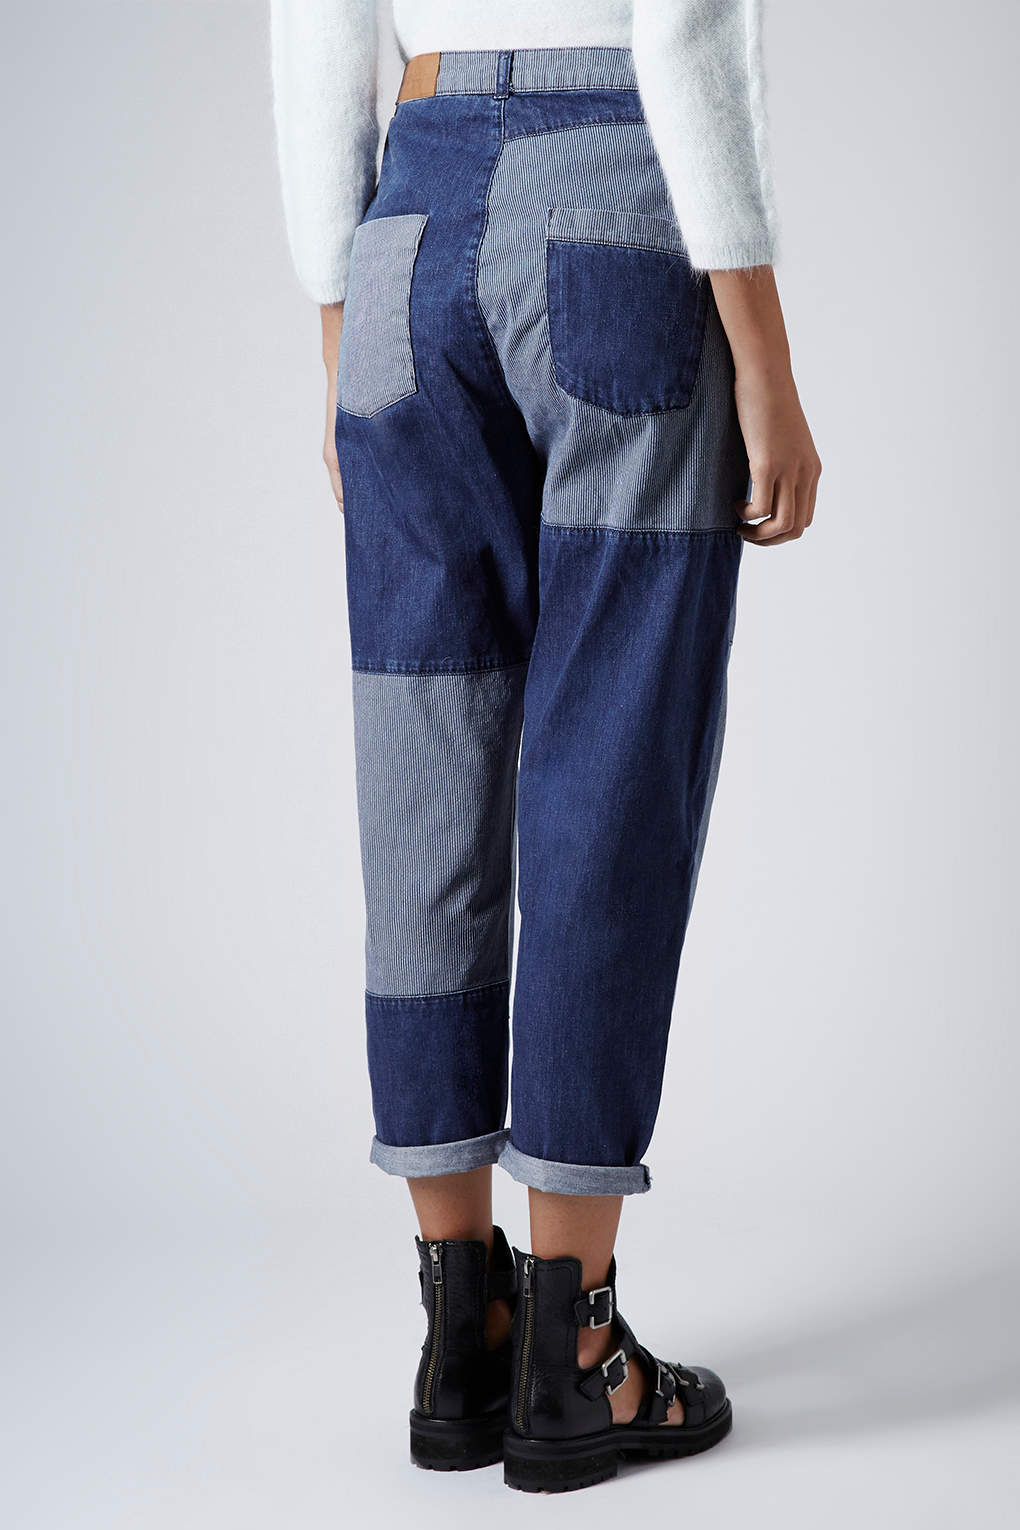 Lyst - Topshop Patchwork Jeans in Blue